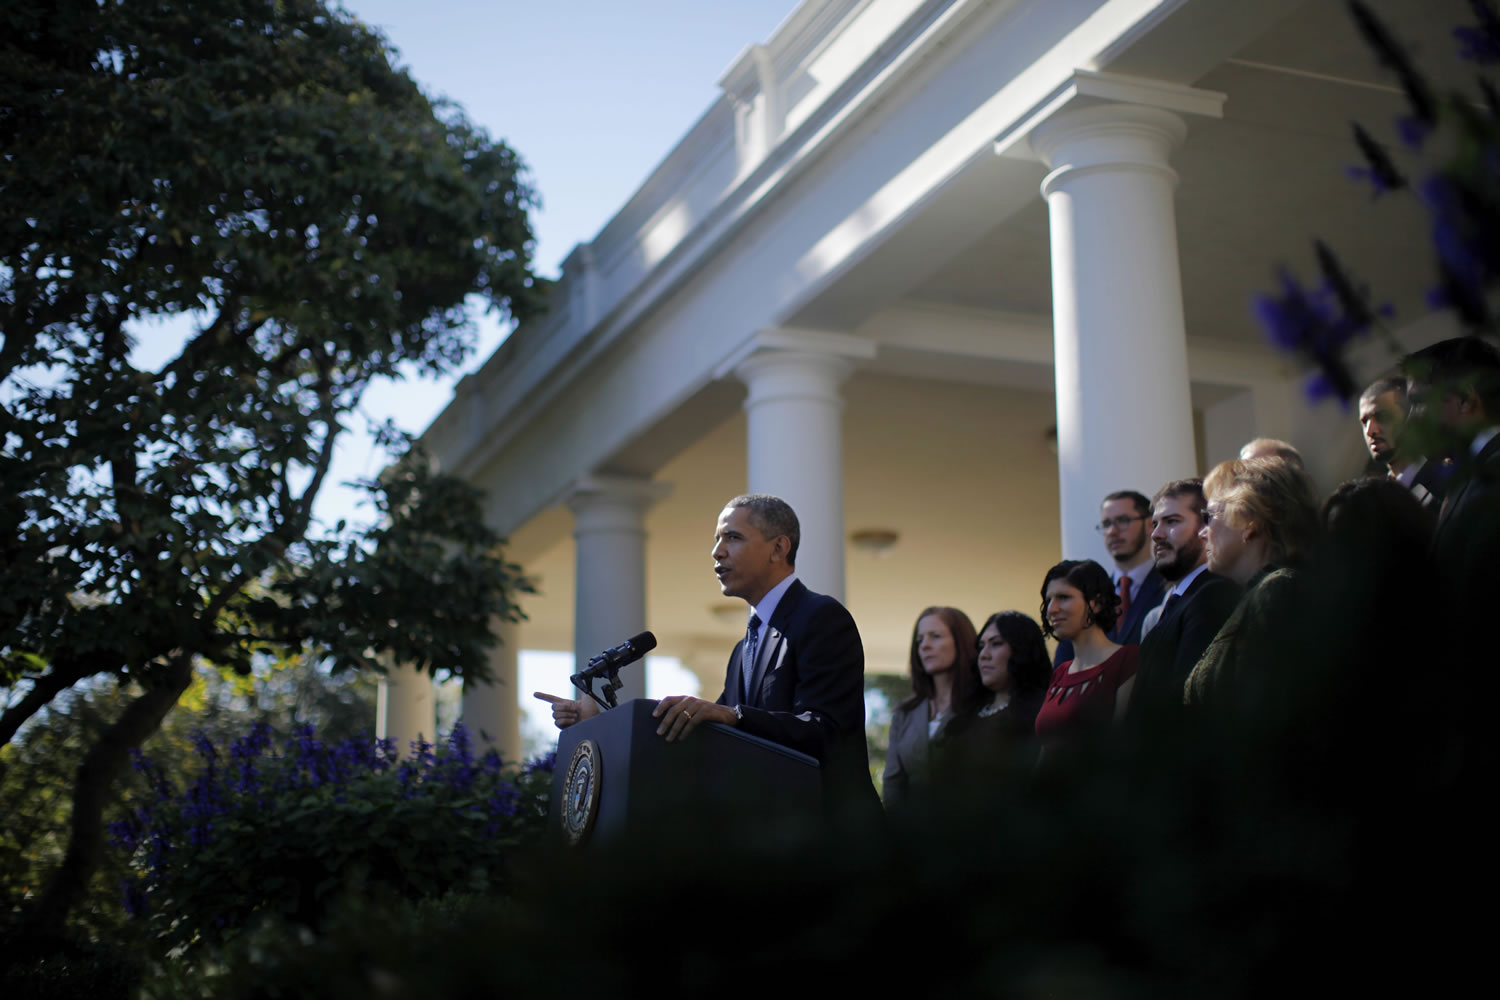 President Barack Obama, standing with supporters of his health care law, speaks in the Rose Garden of the White House in Washington on Monday on the initial rollout of the health care overhaul.